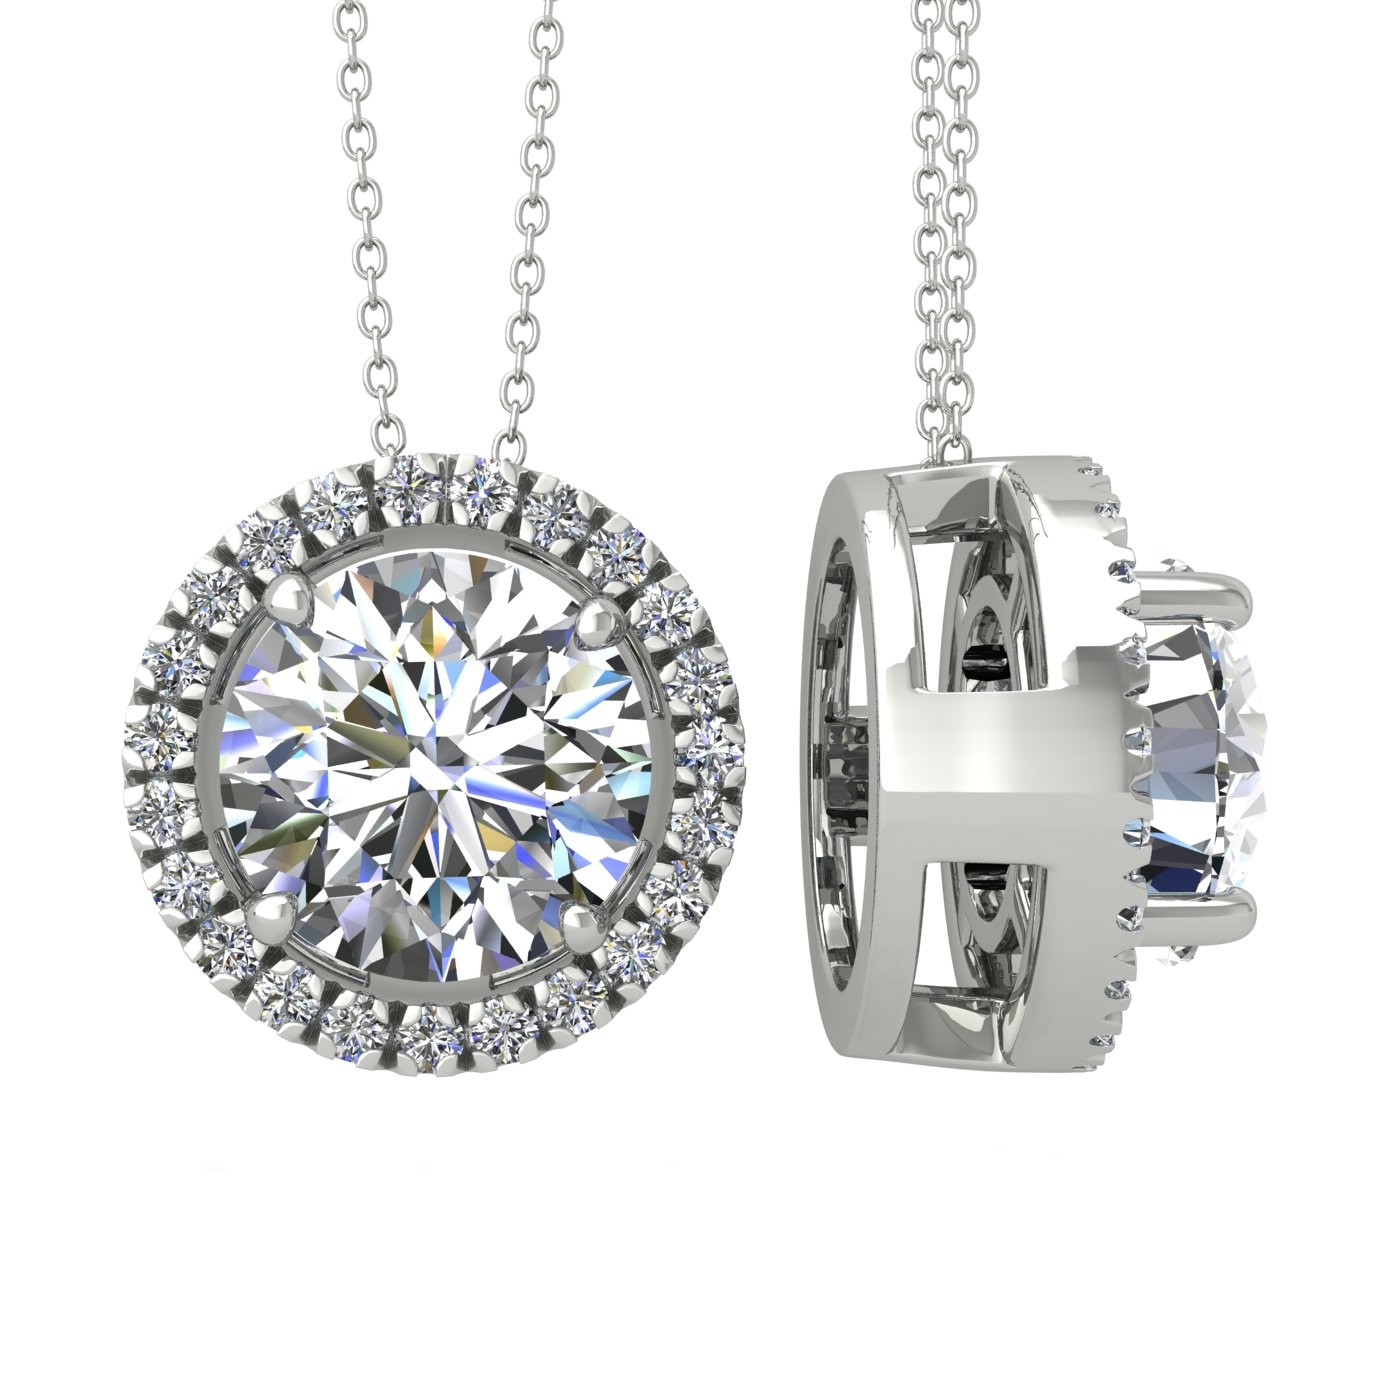 18k white gold  0,3 ct 4 prong round shape diamond pendant with diamond pavÉ set halo including chain seperate from the pendant Photos & images